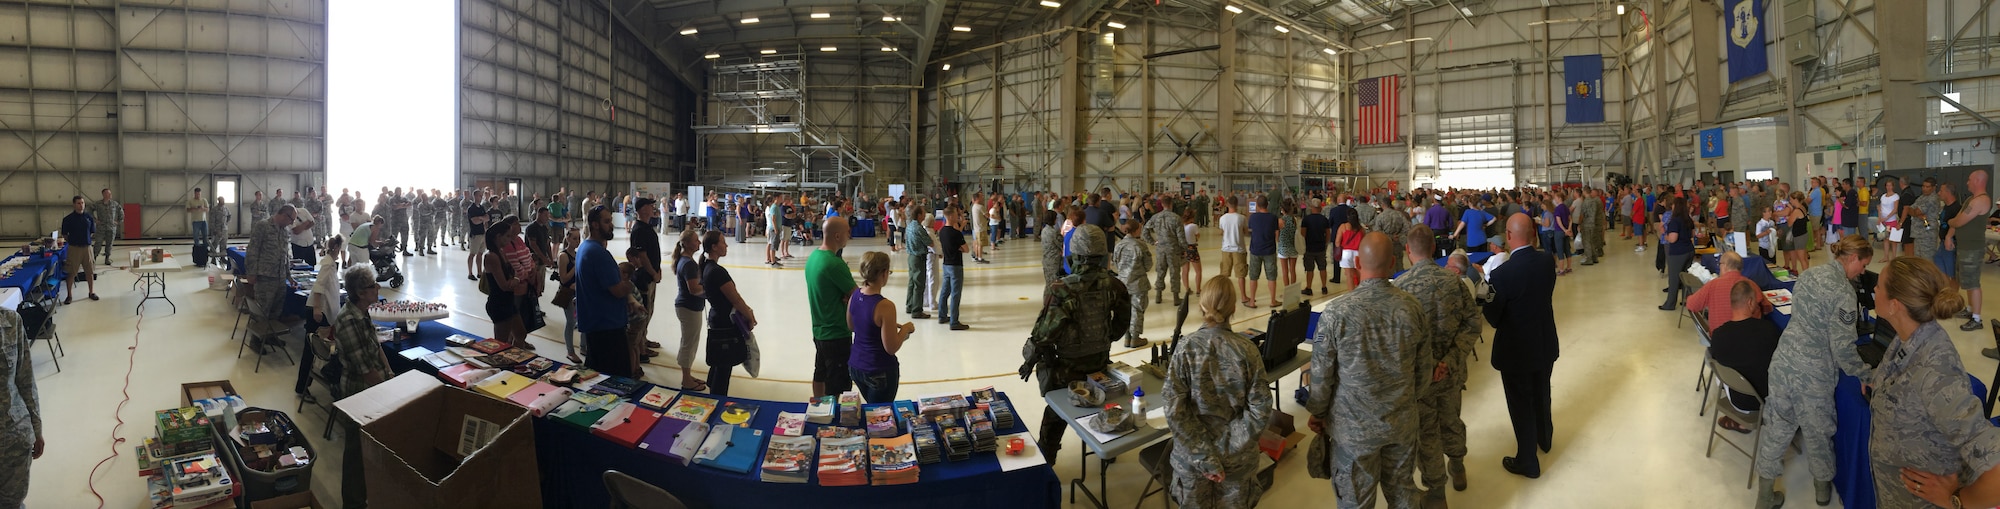 Col. James Locke, commander of the 128th Air Refueling Wing, welcomes Airmen and their families to the 128 ARW Wingman Weekend, which featured a resource information fair, games, and military displays Aug. 10, 2014 here.  More than 30 civilian and military organizations displayed booths in an aircraft hangar during the family day event to inform military members and their families of the resources and support they provide.  (U.S. Air National Guard photo by Tech. Sgt. James Michaels/Released)